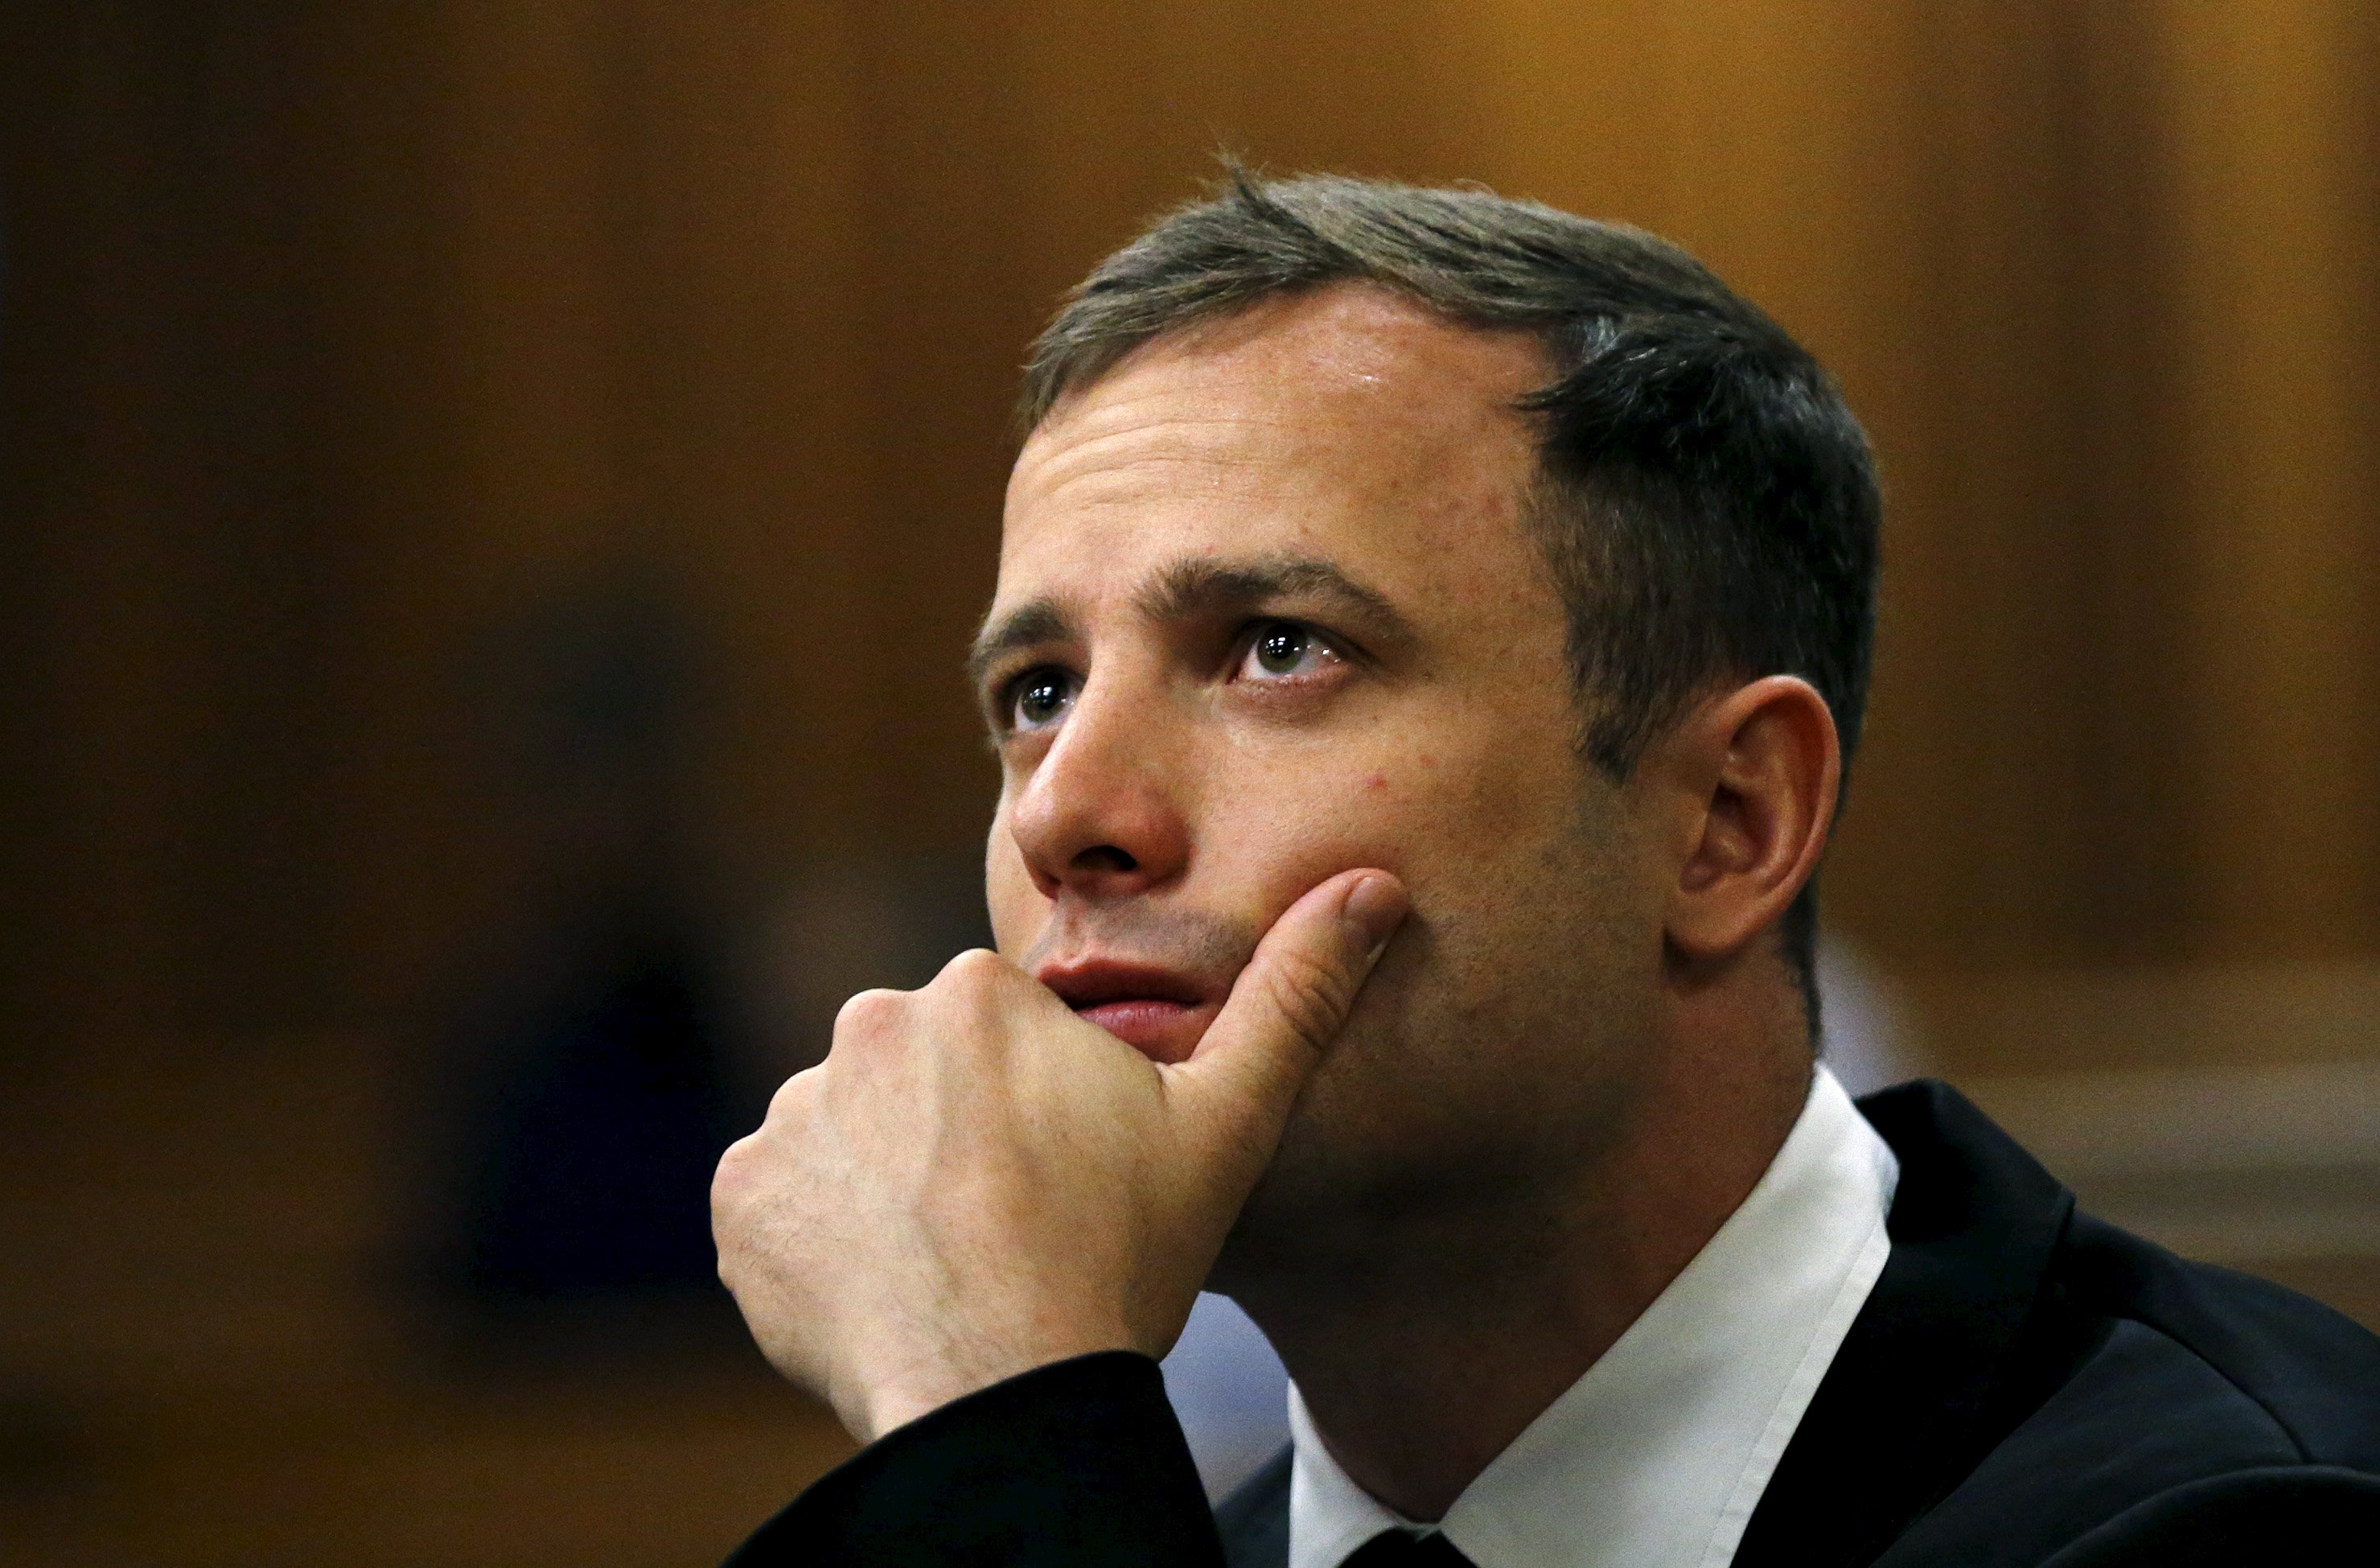 Olympic and Paralympic track star Oscar Pistorius is pictured ahead of his sentencing hearing.